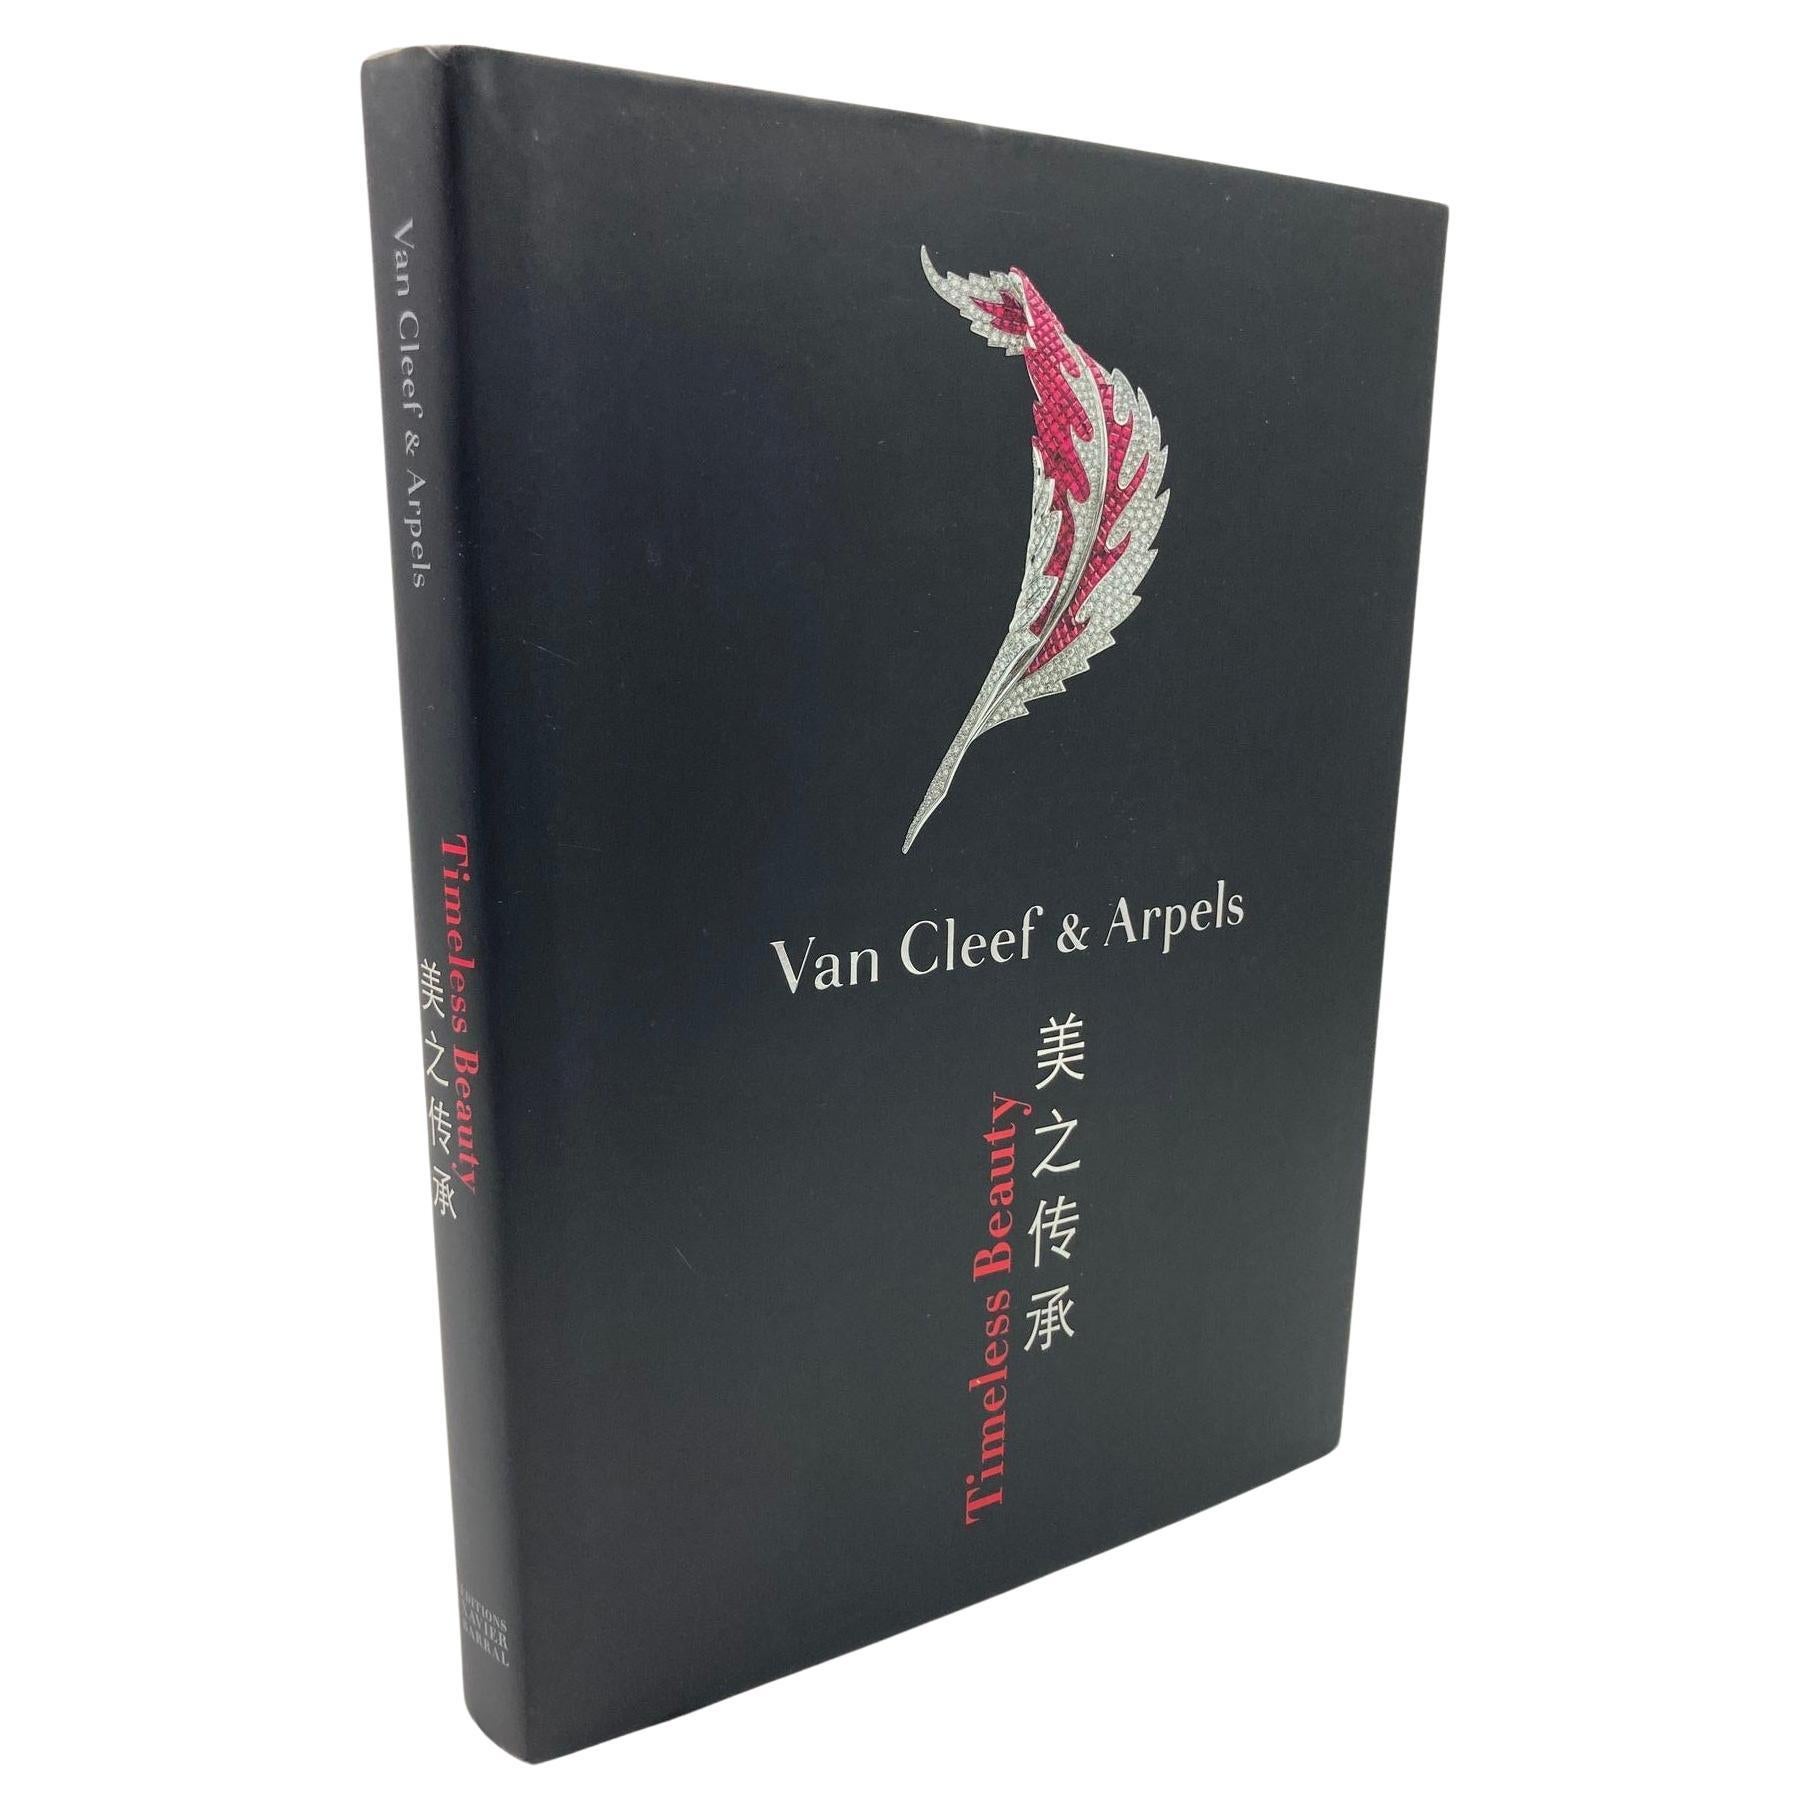 Van Cleef & Arpels: Timeless Beauty Hardcover Book 2012 For Sale